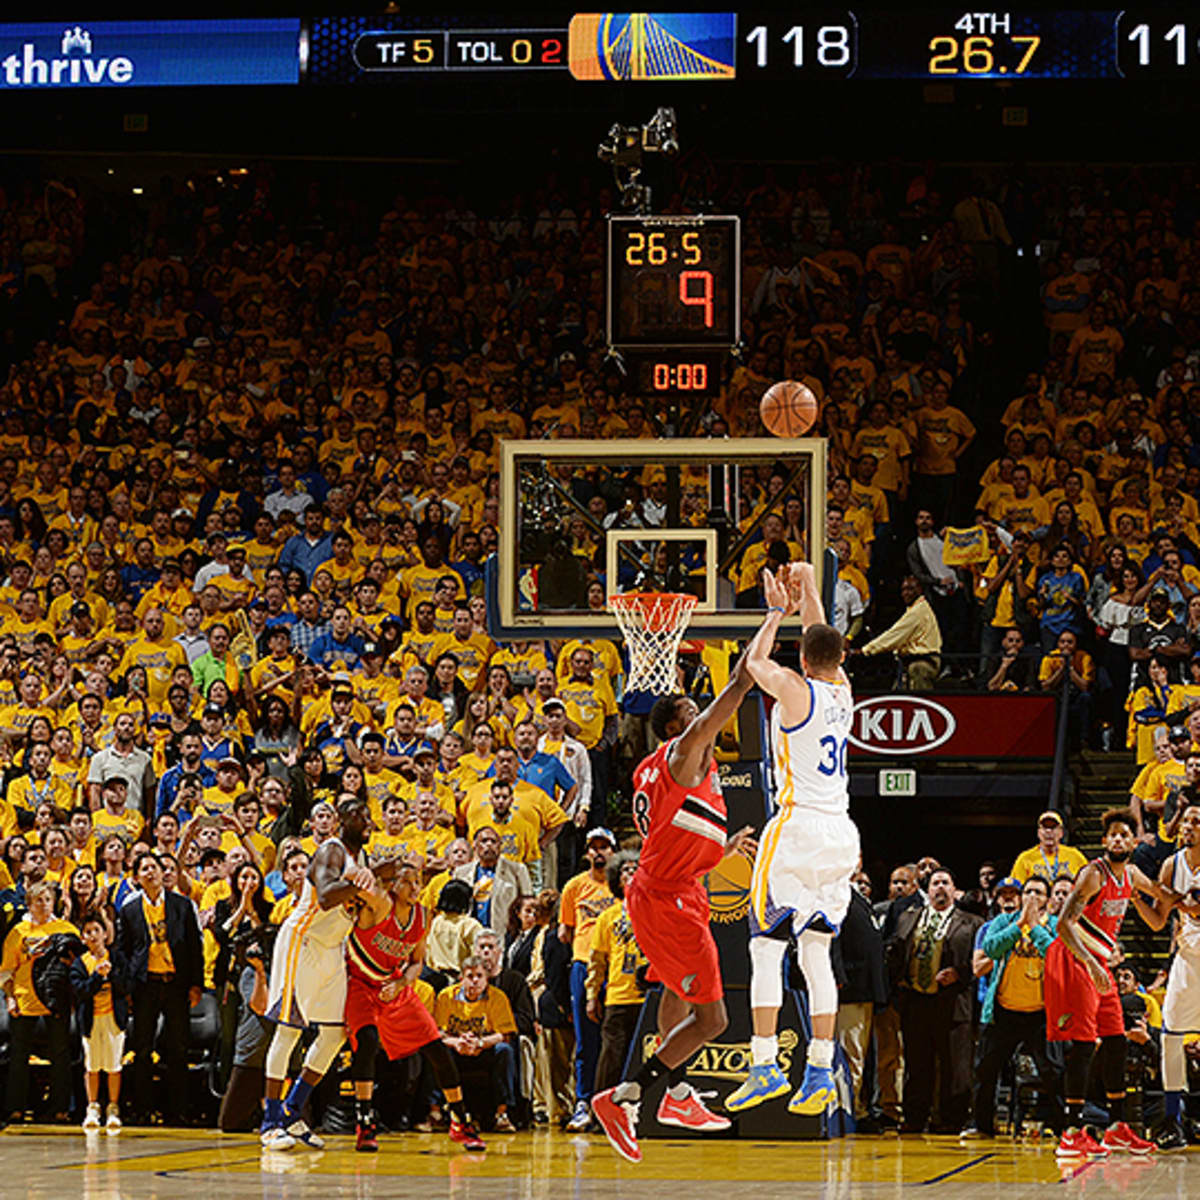 Download Klay Thompson Edited Crossover Wallpaper